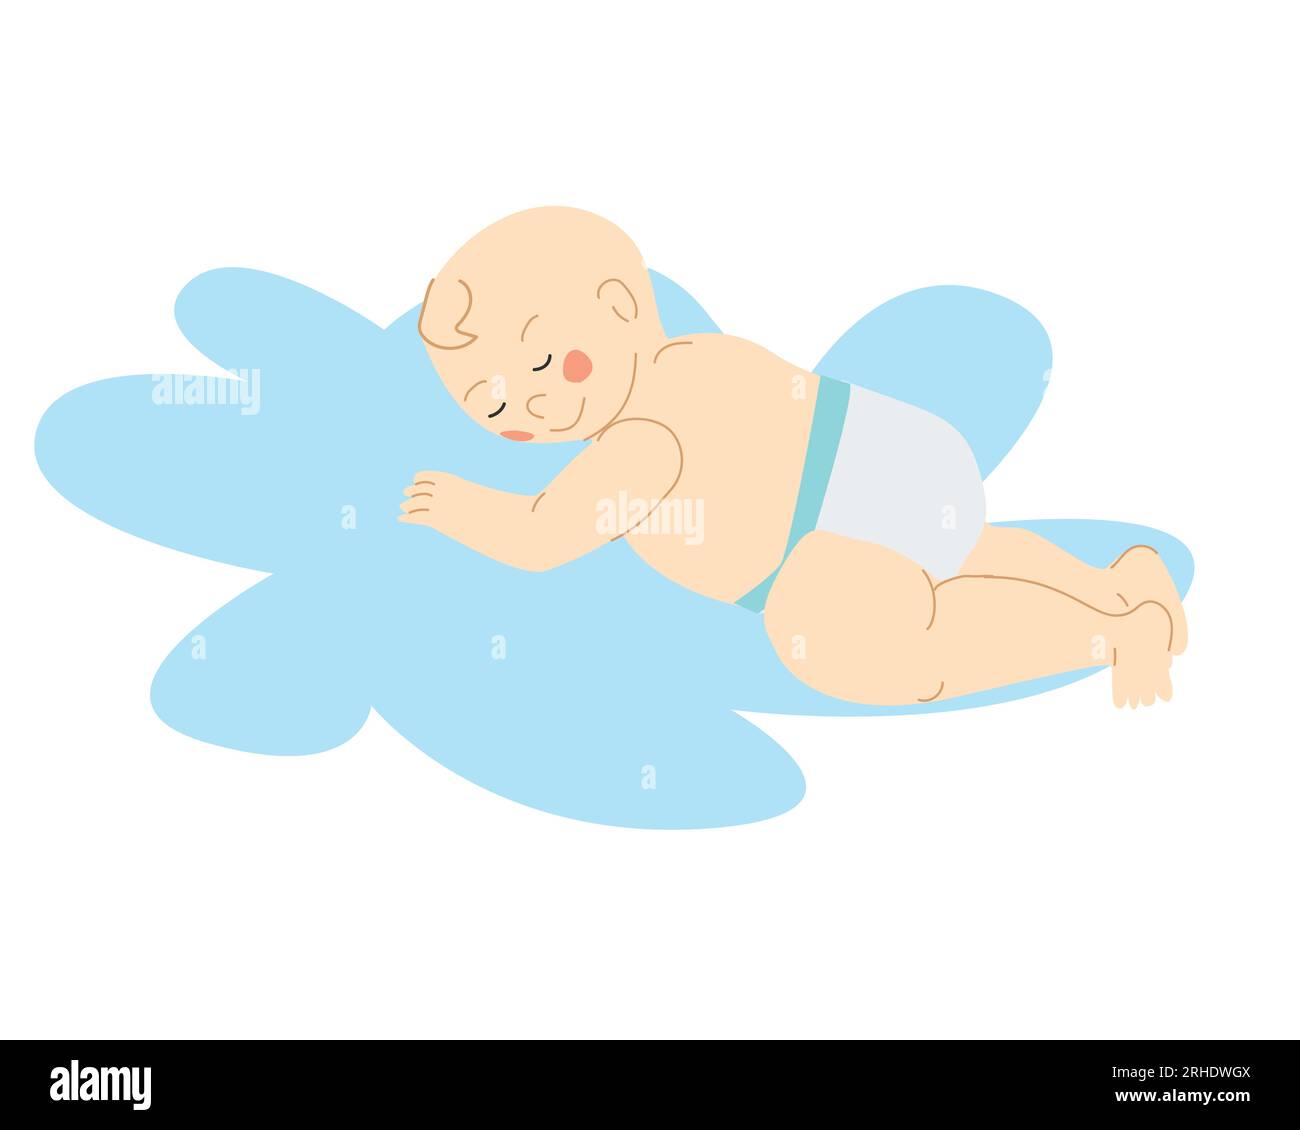 Sleeping baby in a flat style, in blue suit Stock Vector